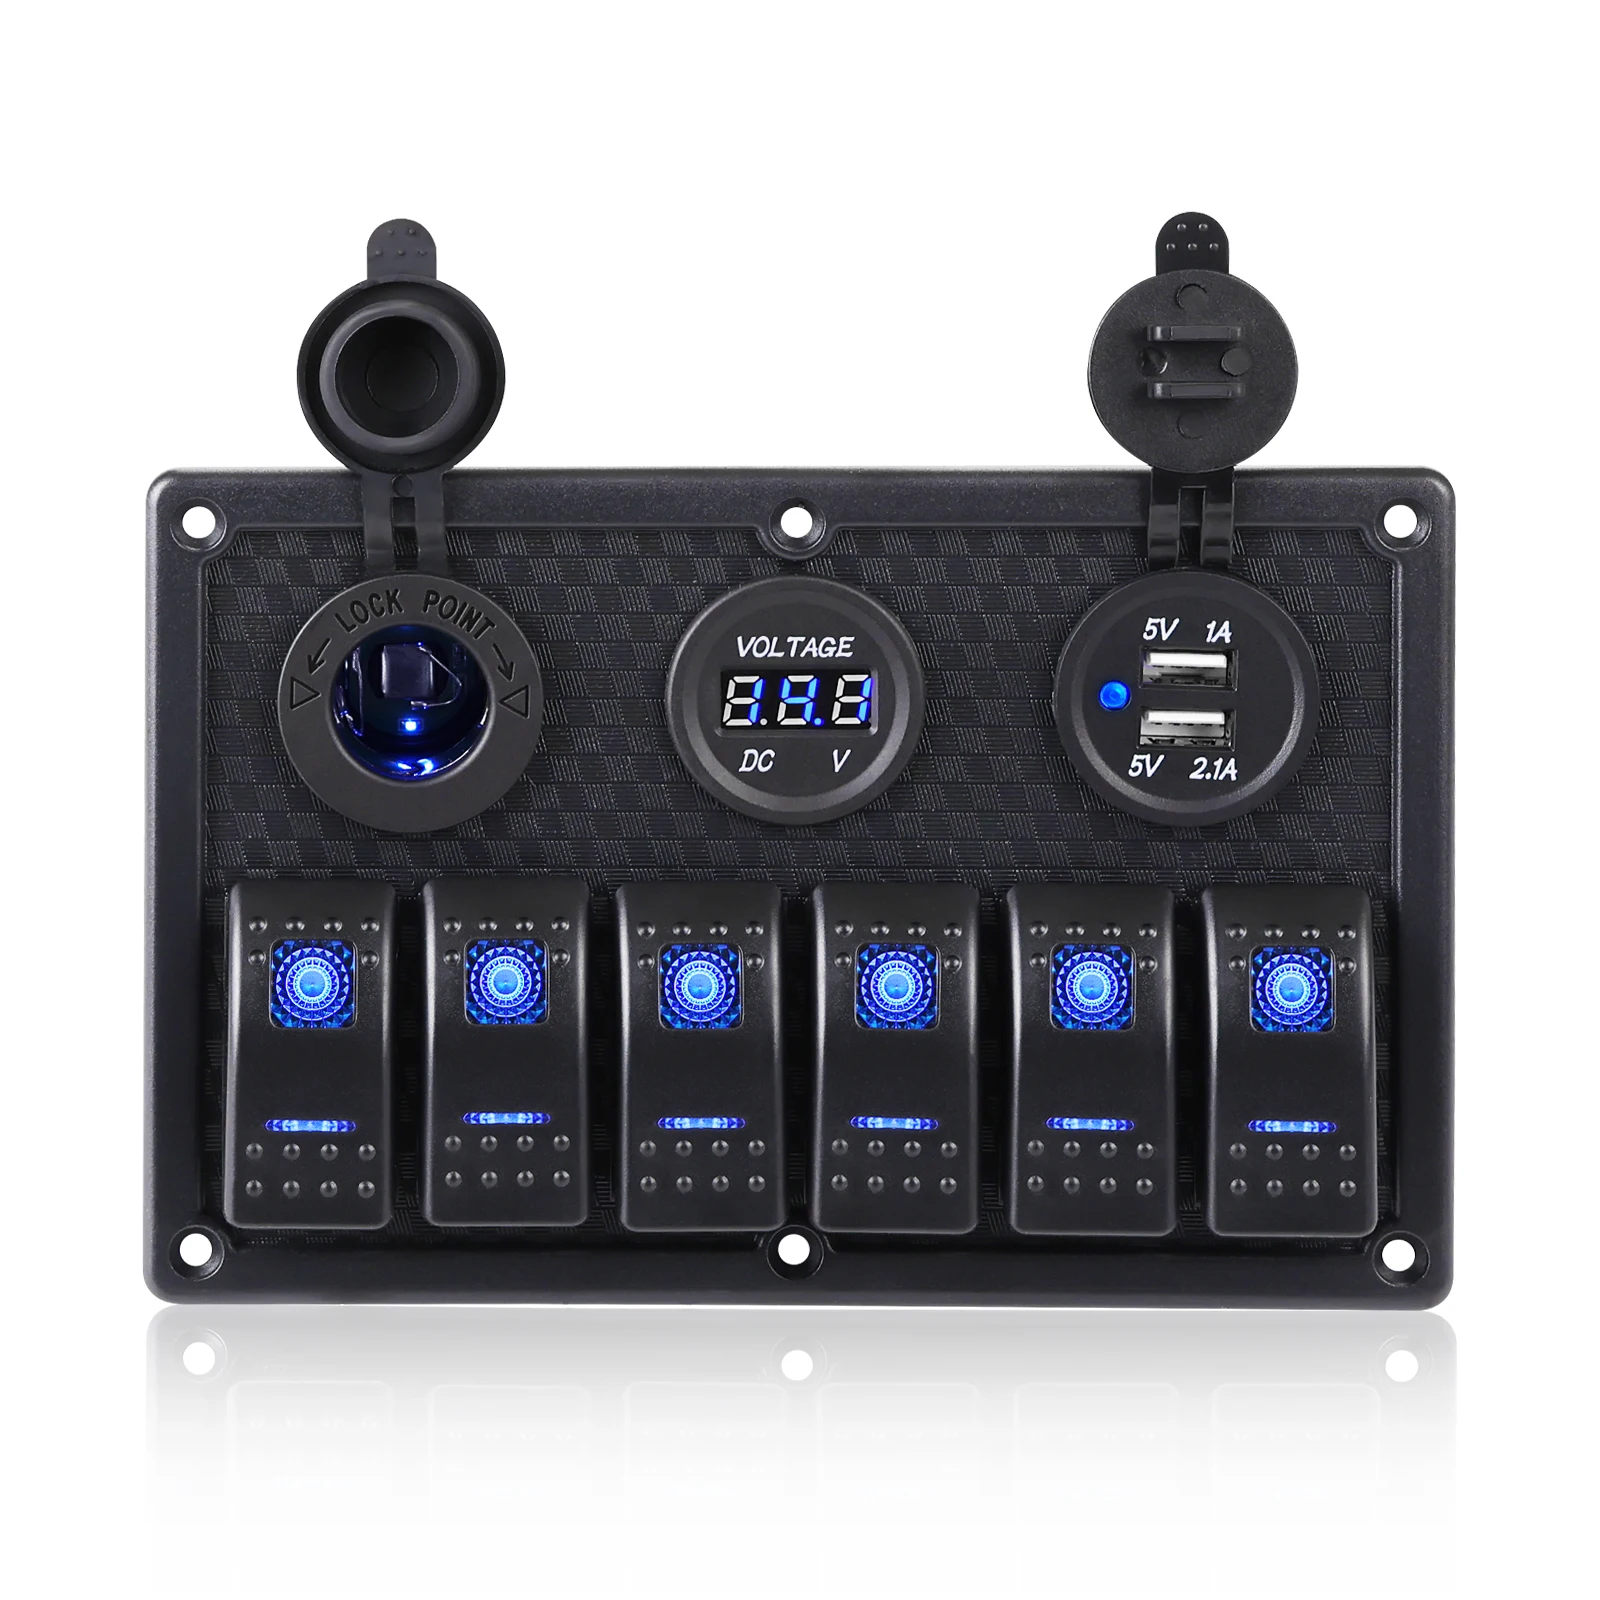 

6 Gang Rocker Switch Panel 4.2A Dual USB Digital Voltmeter Waterproof LED Toggle Switch Panel for Automotive Car Marine Boat RV